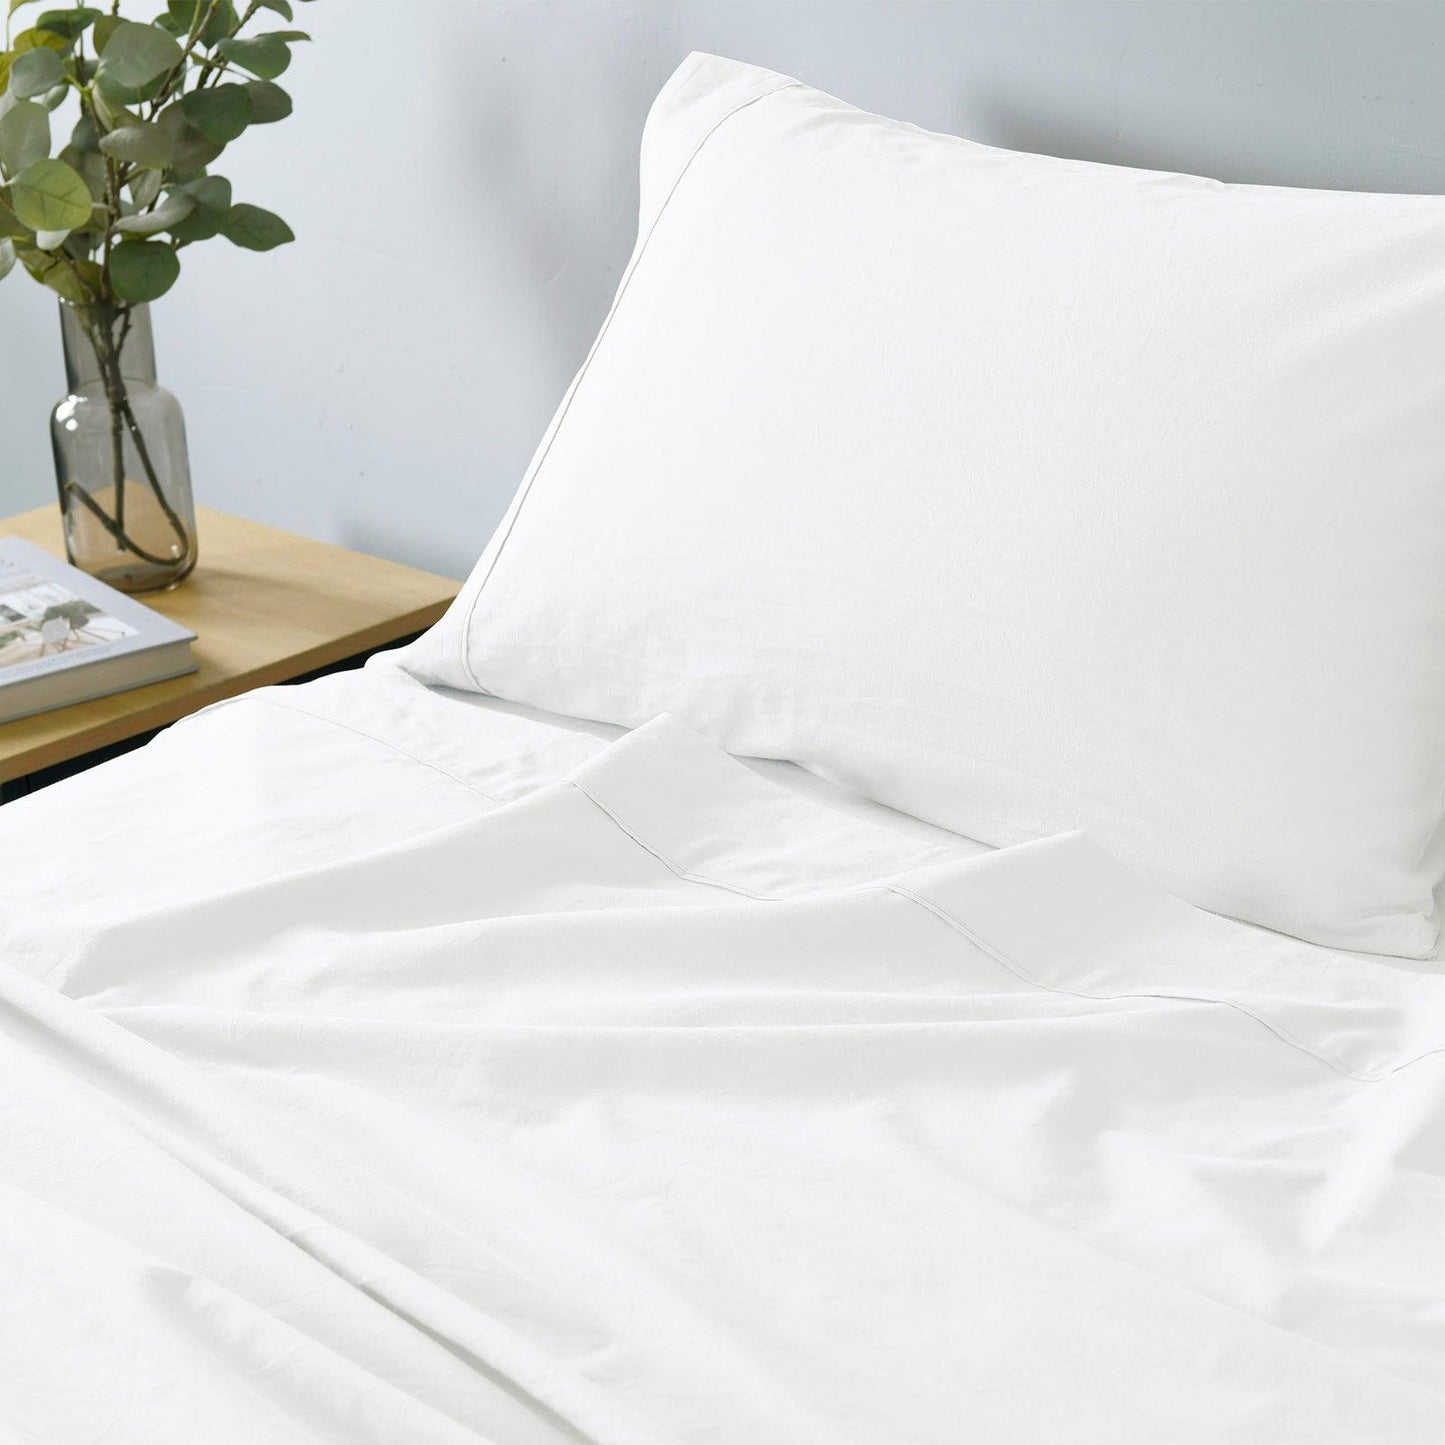 Royal Comfort Vintage Washed 100% Cotton Sheet Set Fitted Flat Sheet Pillowcases - Single - White